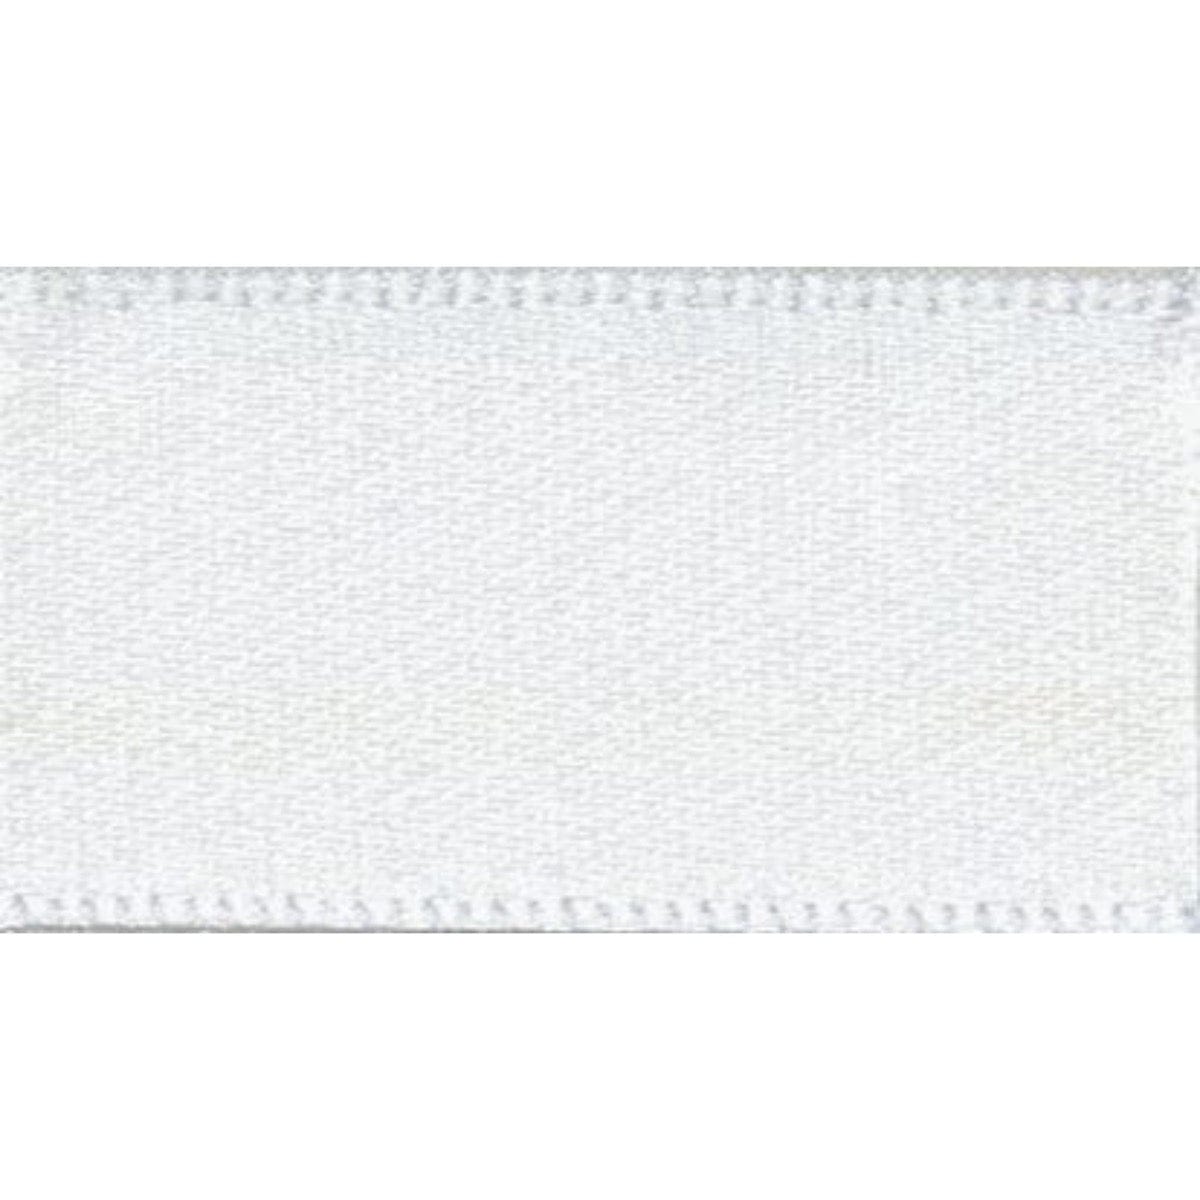 Double Faced Satin Ribbon: White: 35mm wide. Price per metre.